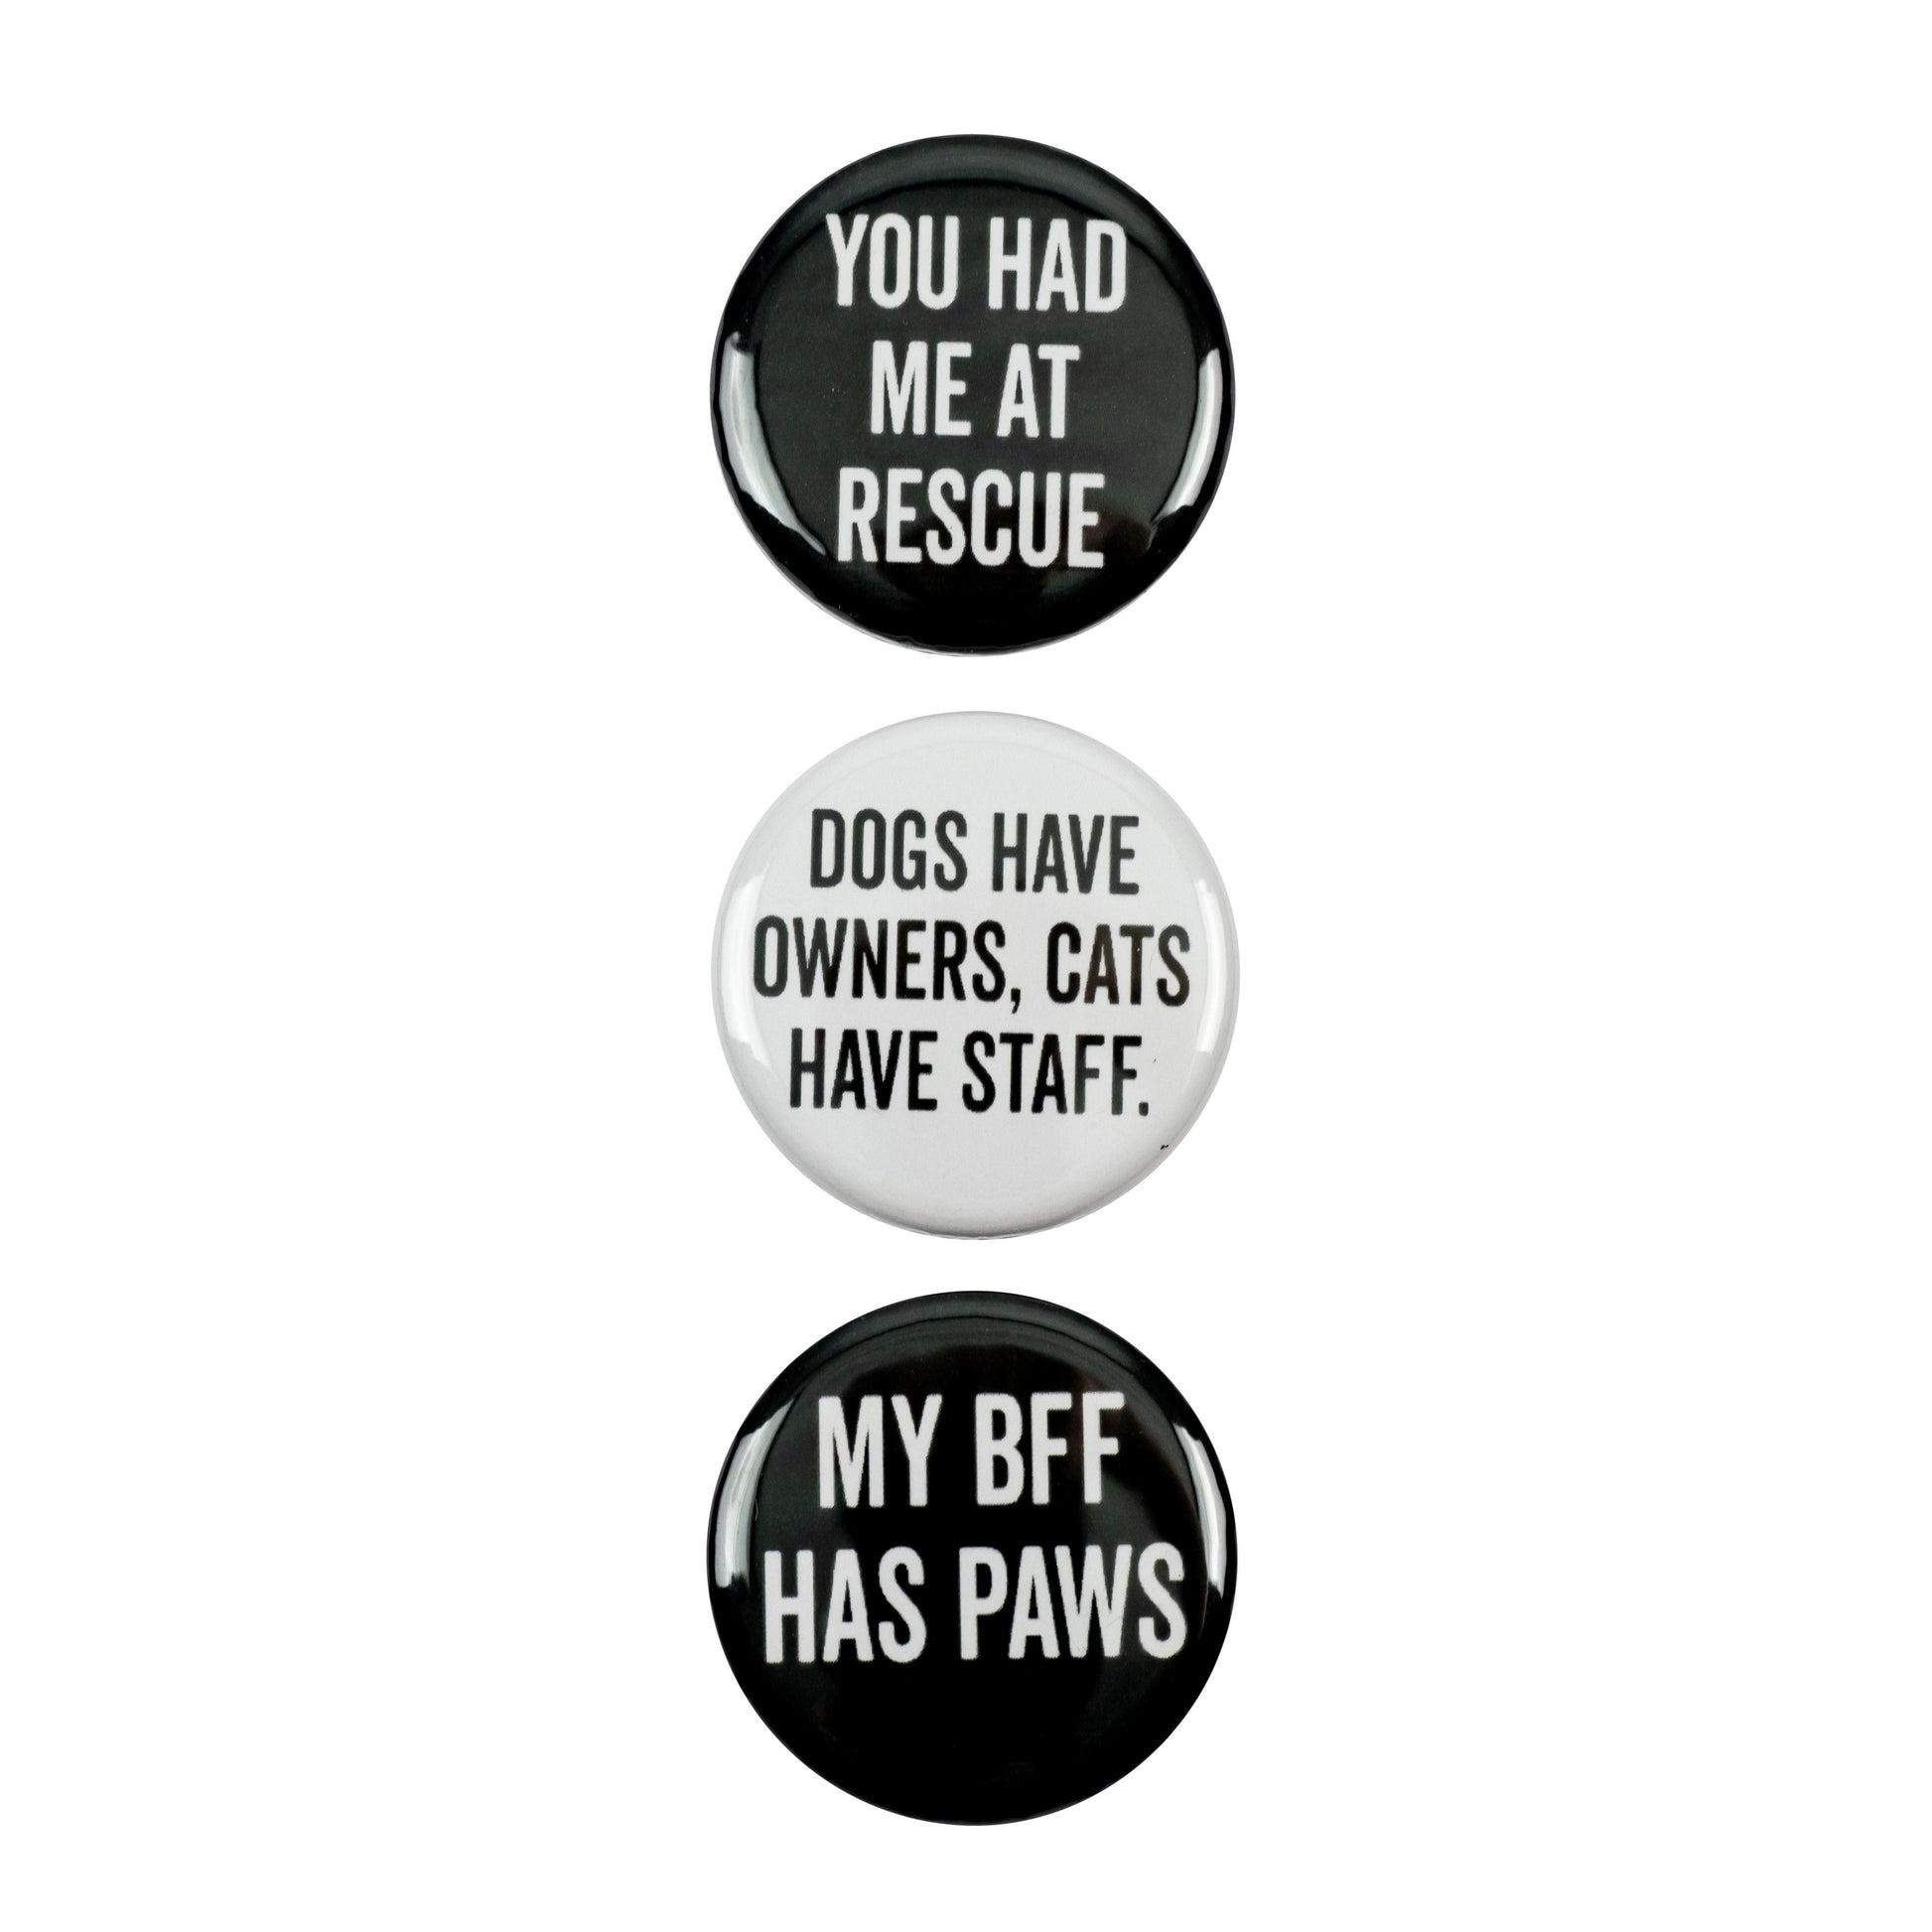 3pc Pin Button Set "You Had Me At Rescue," "Dogs Have Owners, Cats Have Staff," & "My BFF Has Paws" Pins